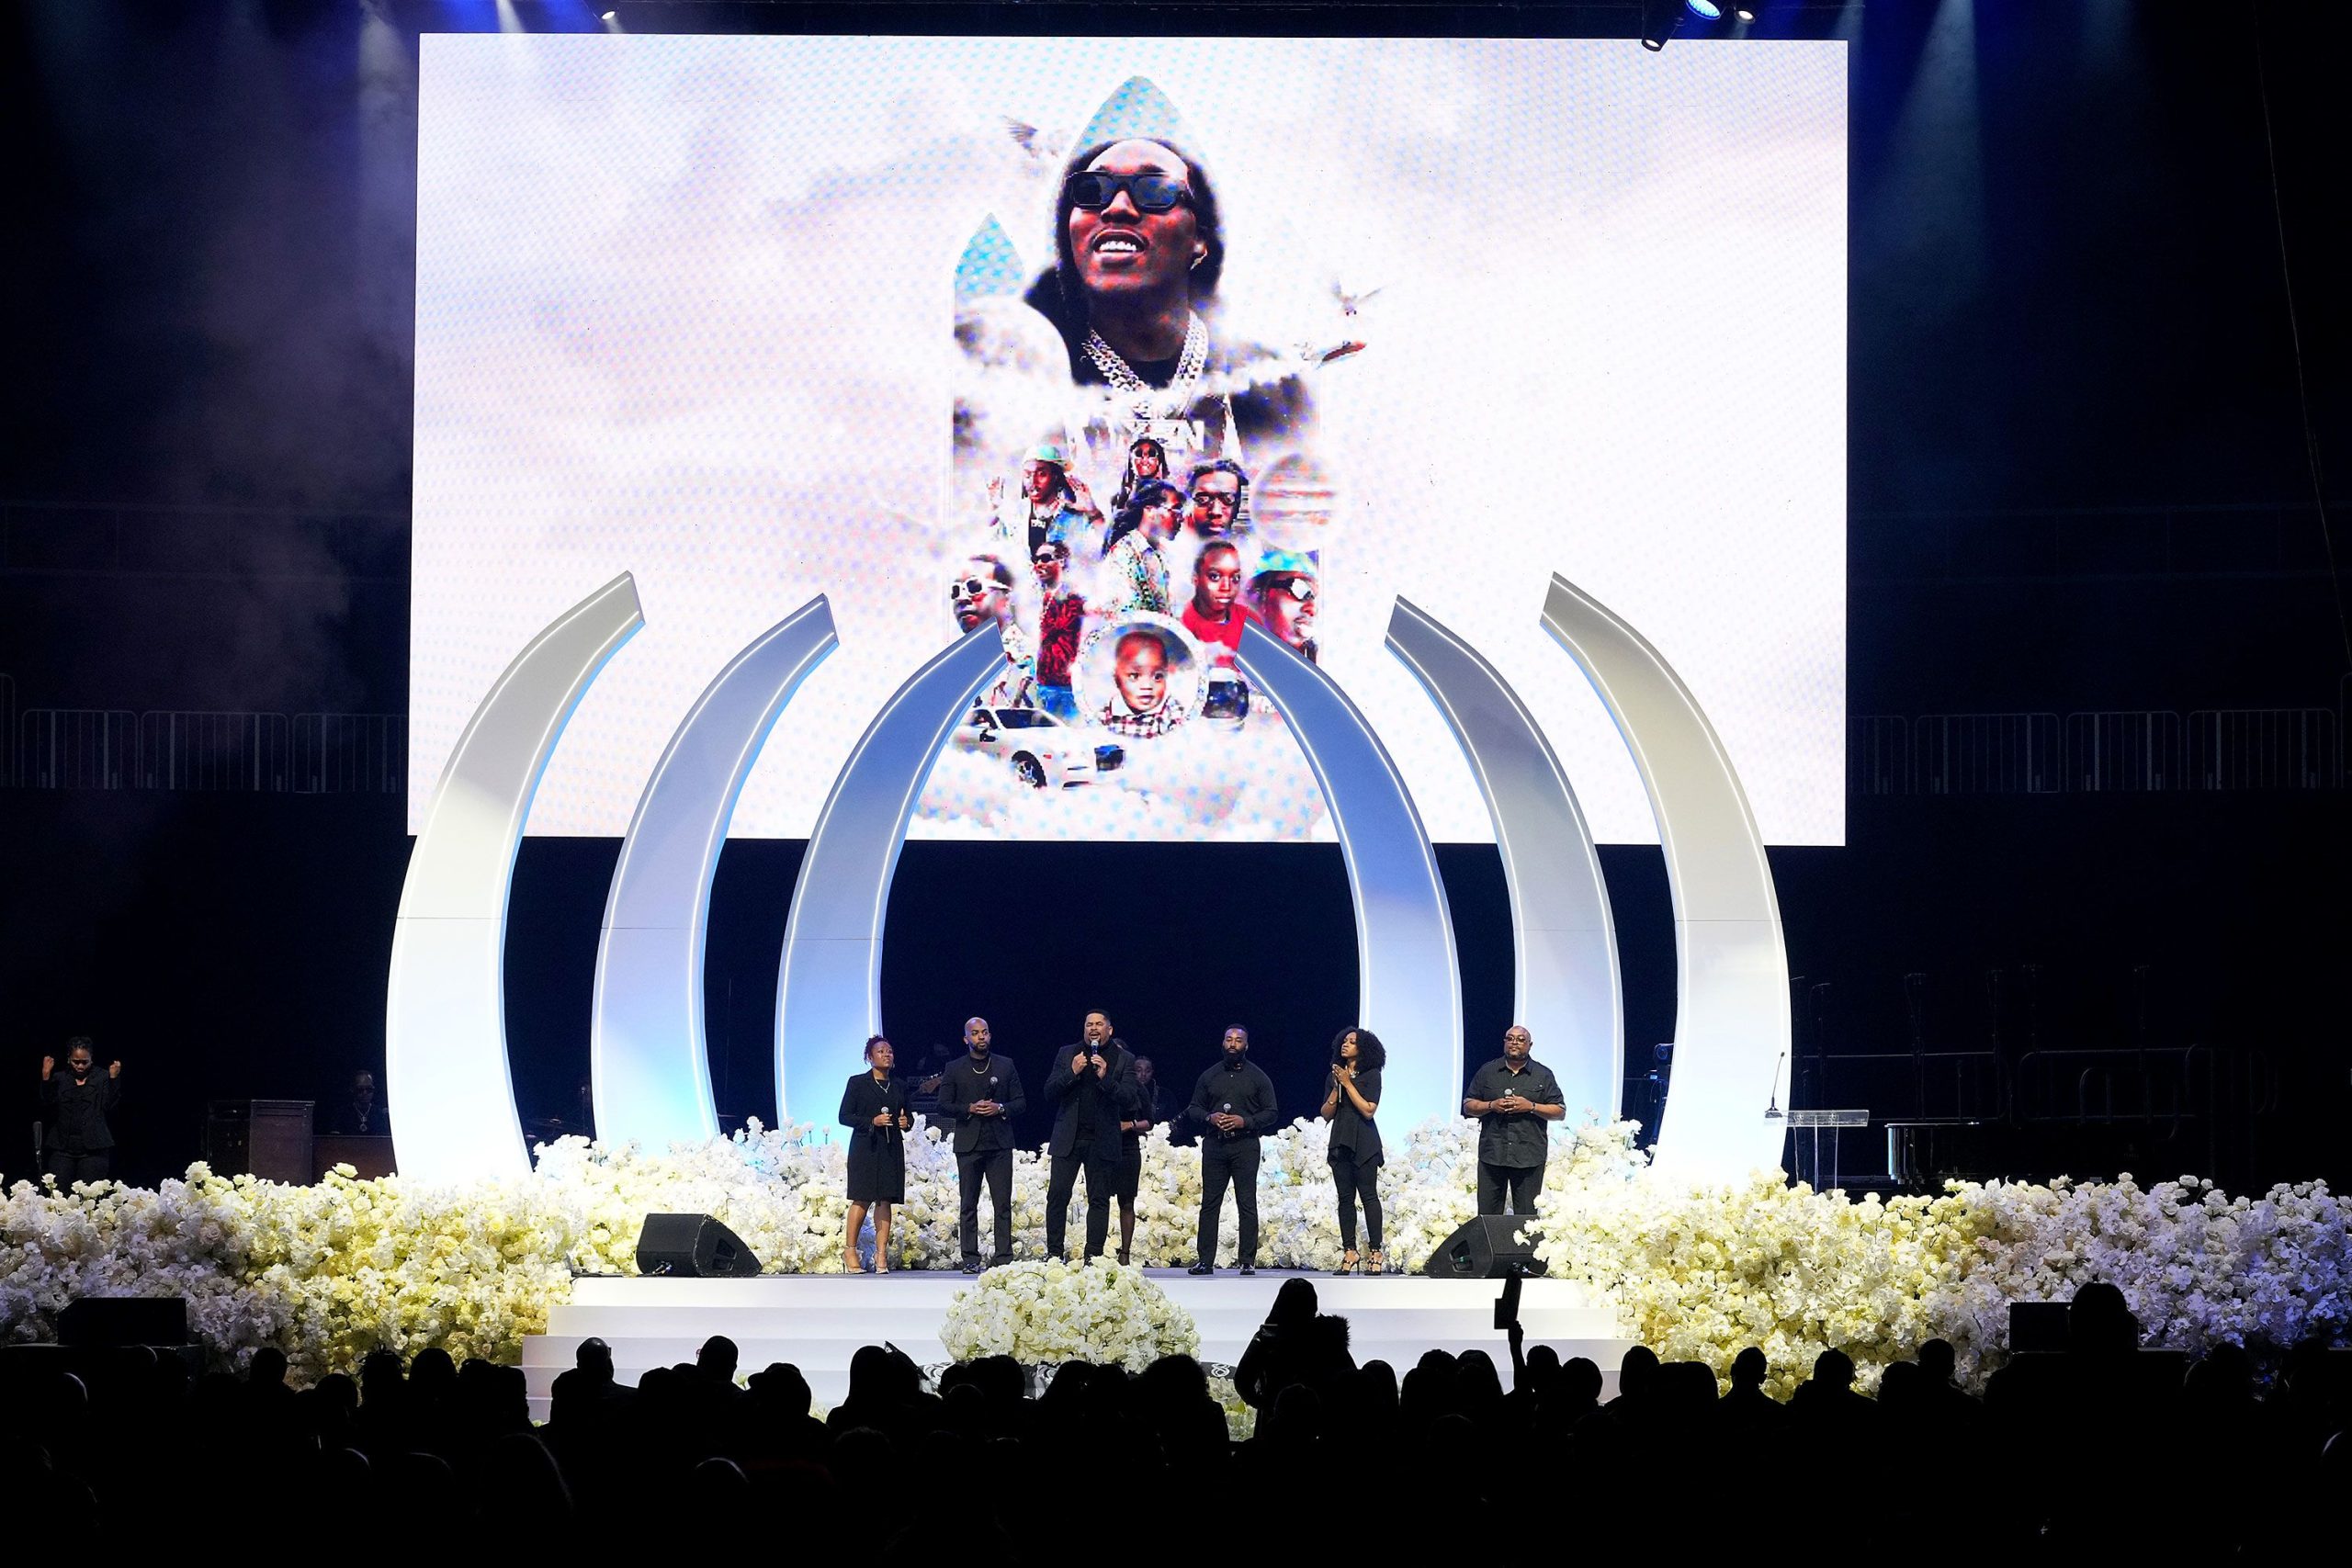 A screenshot from takeoff's funeral shows a group standing on stage in front of his picture on a screen.